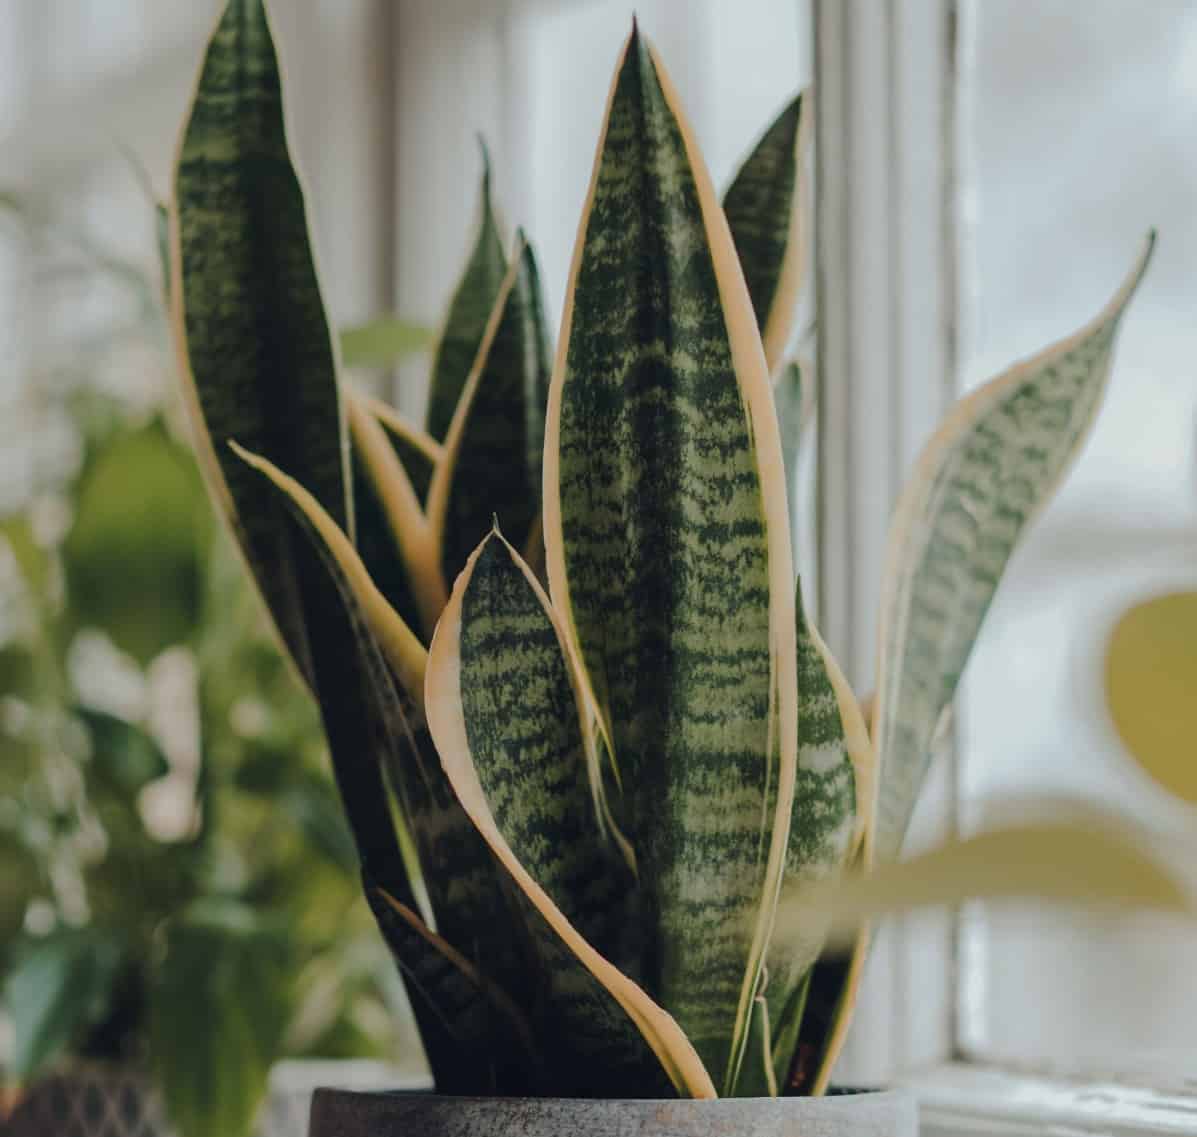 Snake plants have striking leaves but no branches.